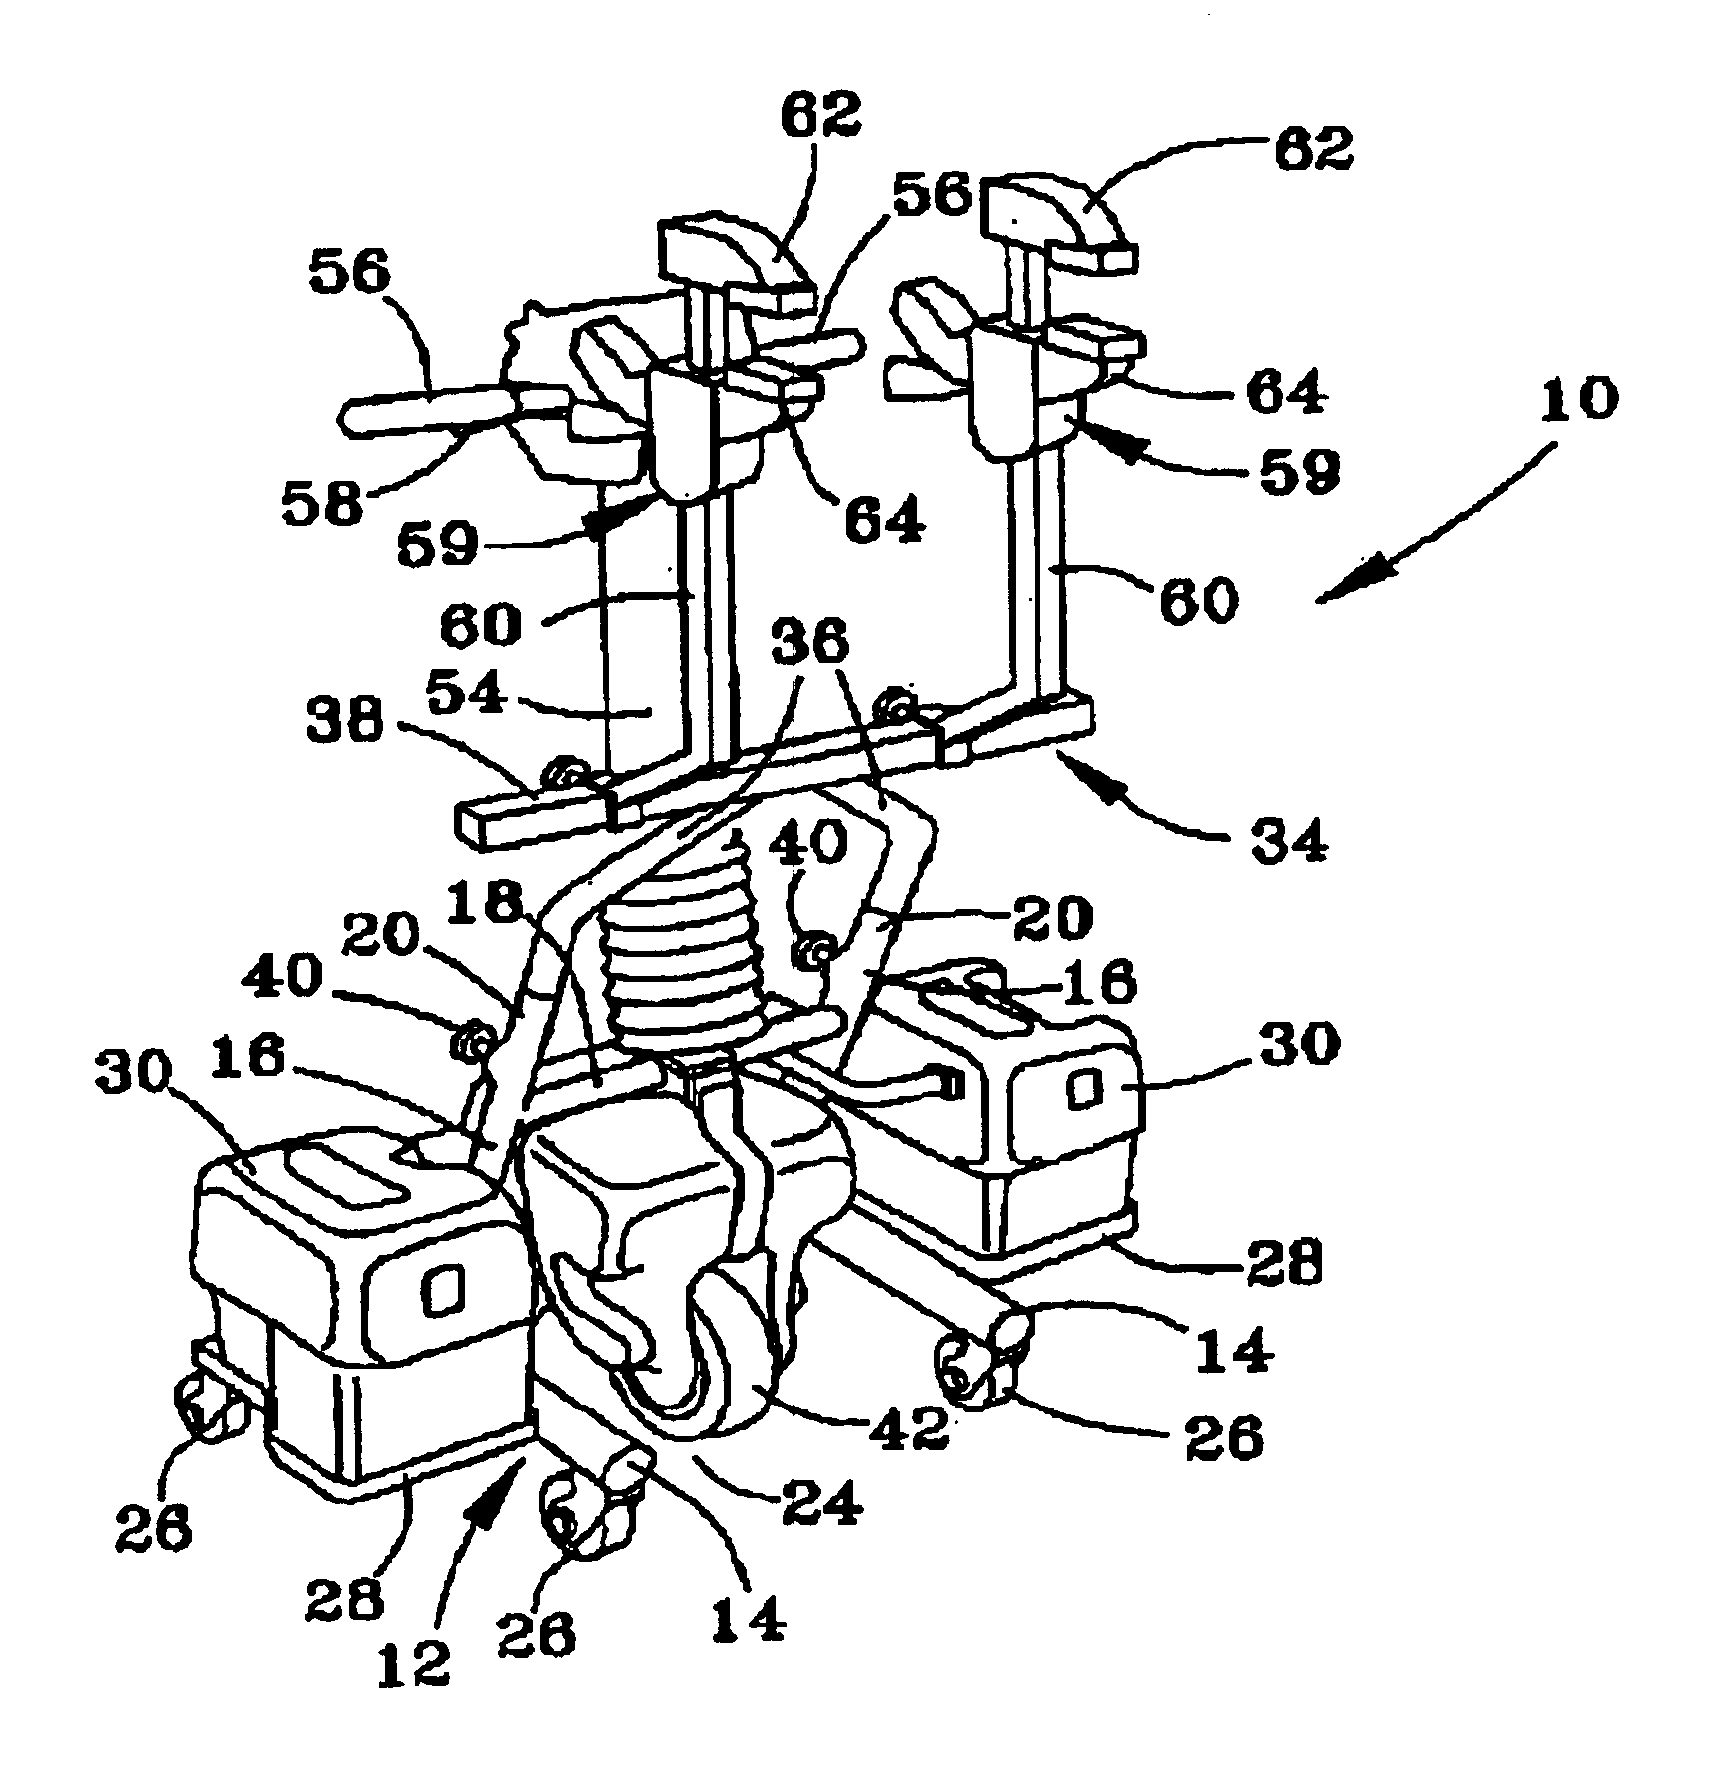 Freestanding self-propelled device for moving objects